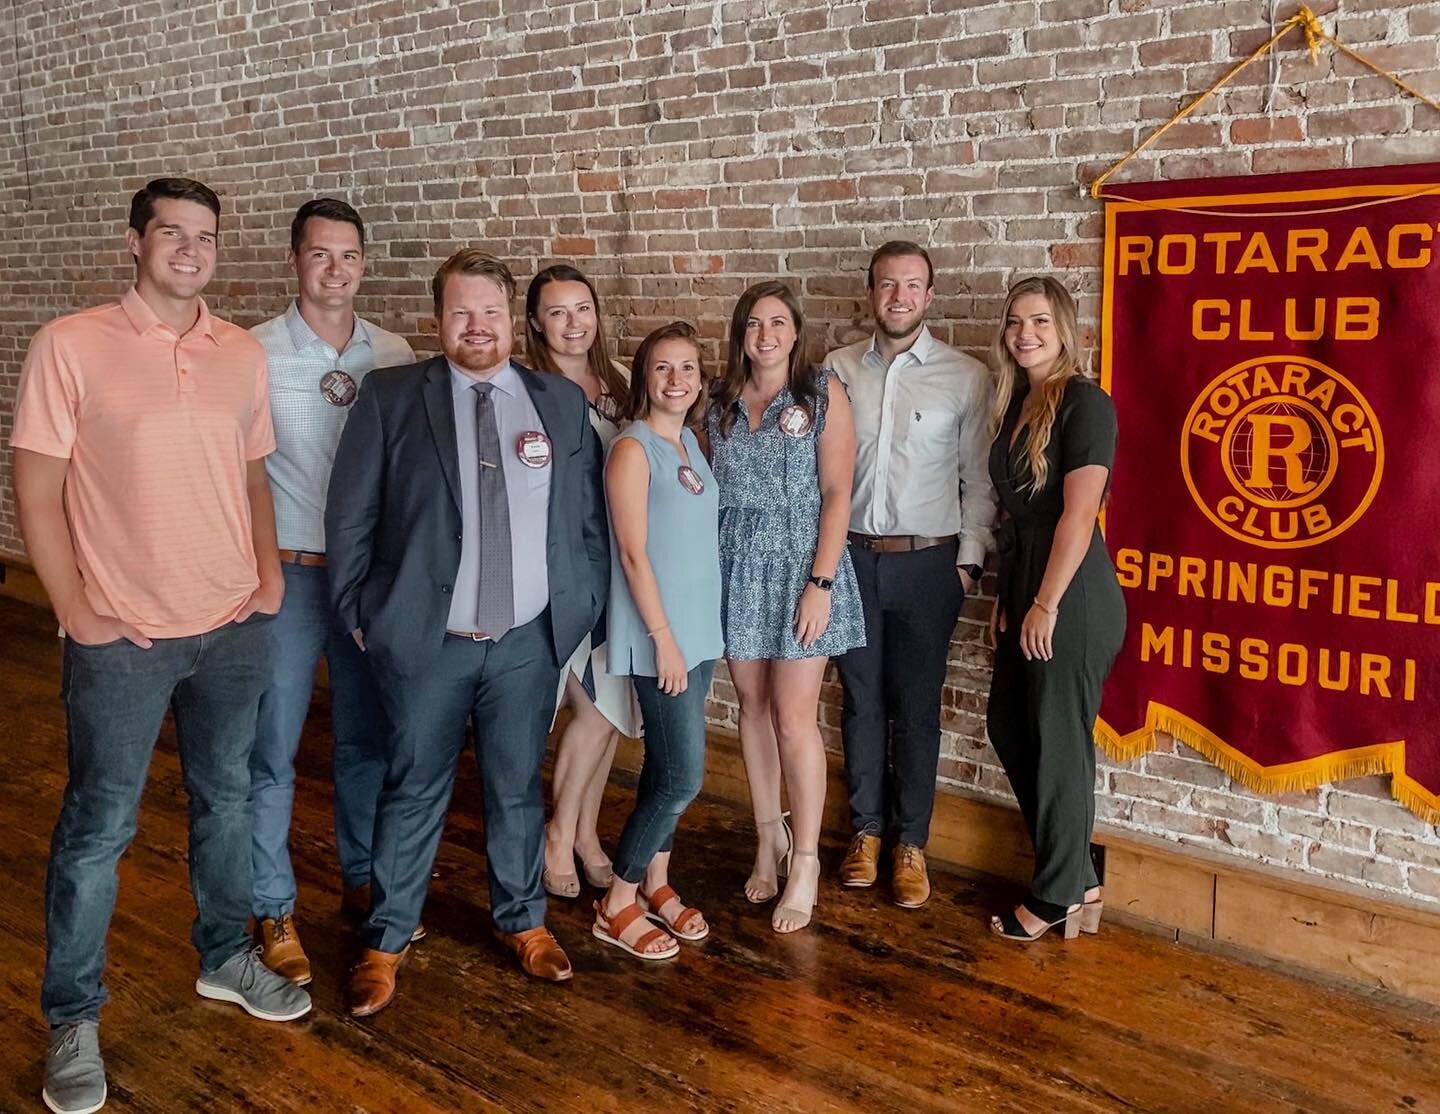 I hope everyone is ready for a great year, because the new Board of Directors is determined to make this one the best yet! 💃 

If you aren&rsquo;t part of Rotaract and you want to be, this is the PERFECT time to join. Come make some great connection